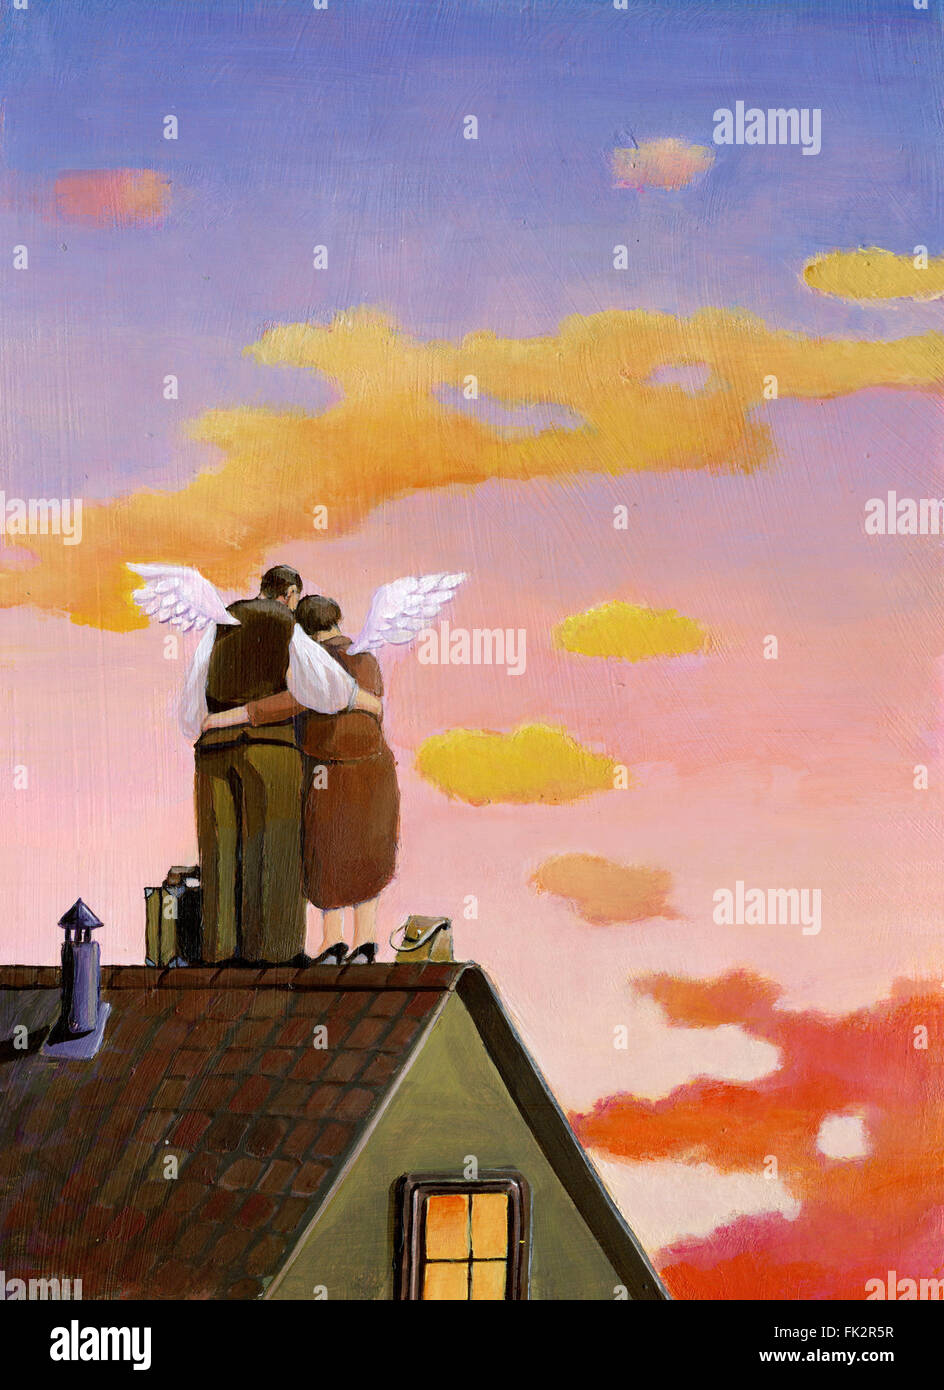 sunset wings union love marriage leave roof romantic evening atmosphere sweetness illustration art background concept surreal fa Stock Photo